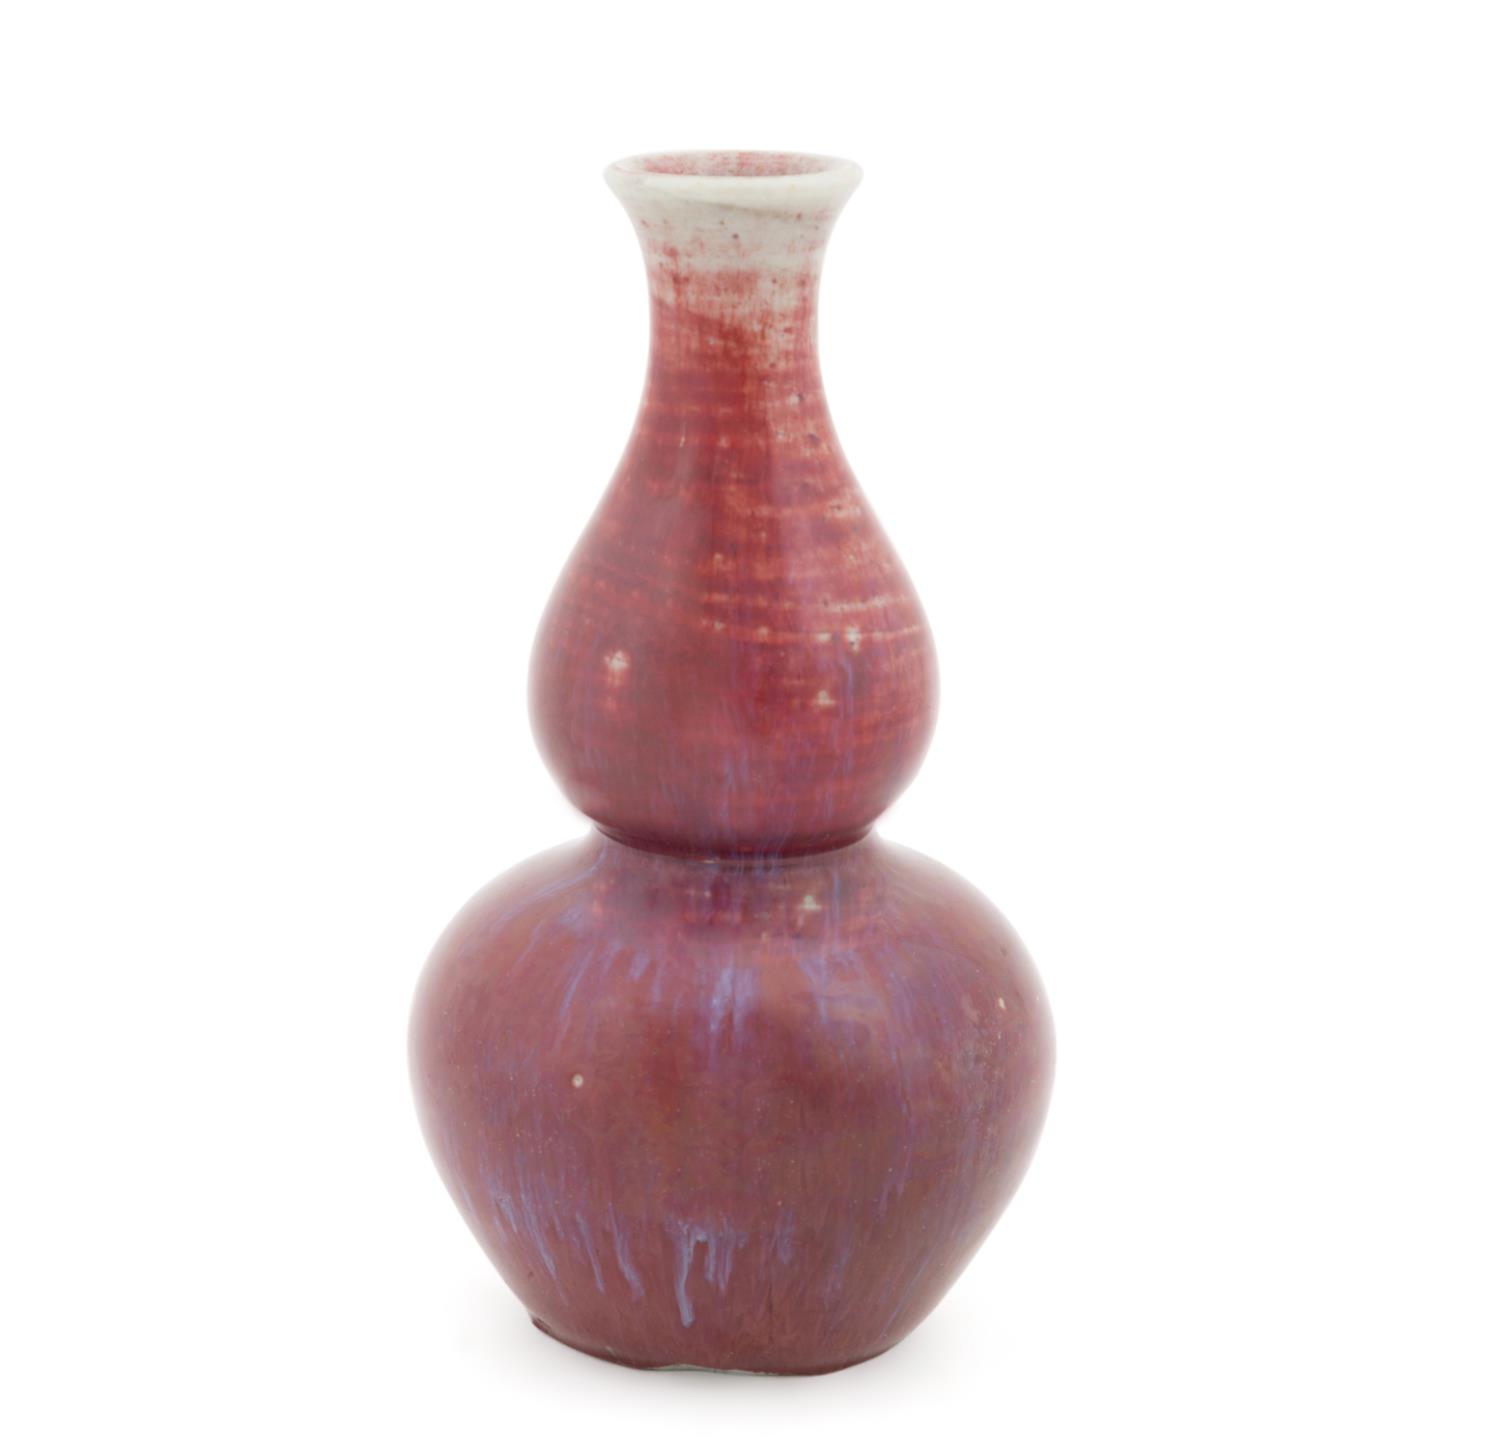 CHINESE FLAMBE GLAZE DOUBLE GOURD 2bfb89